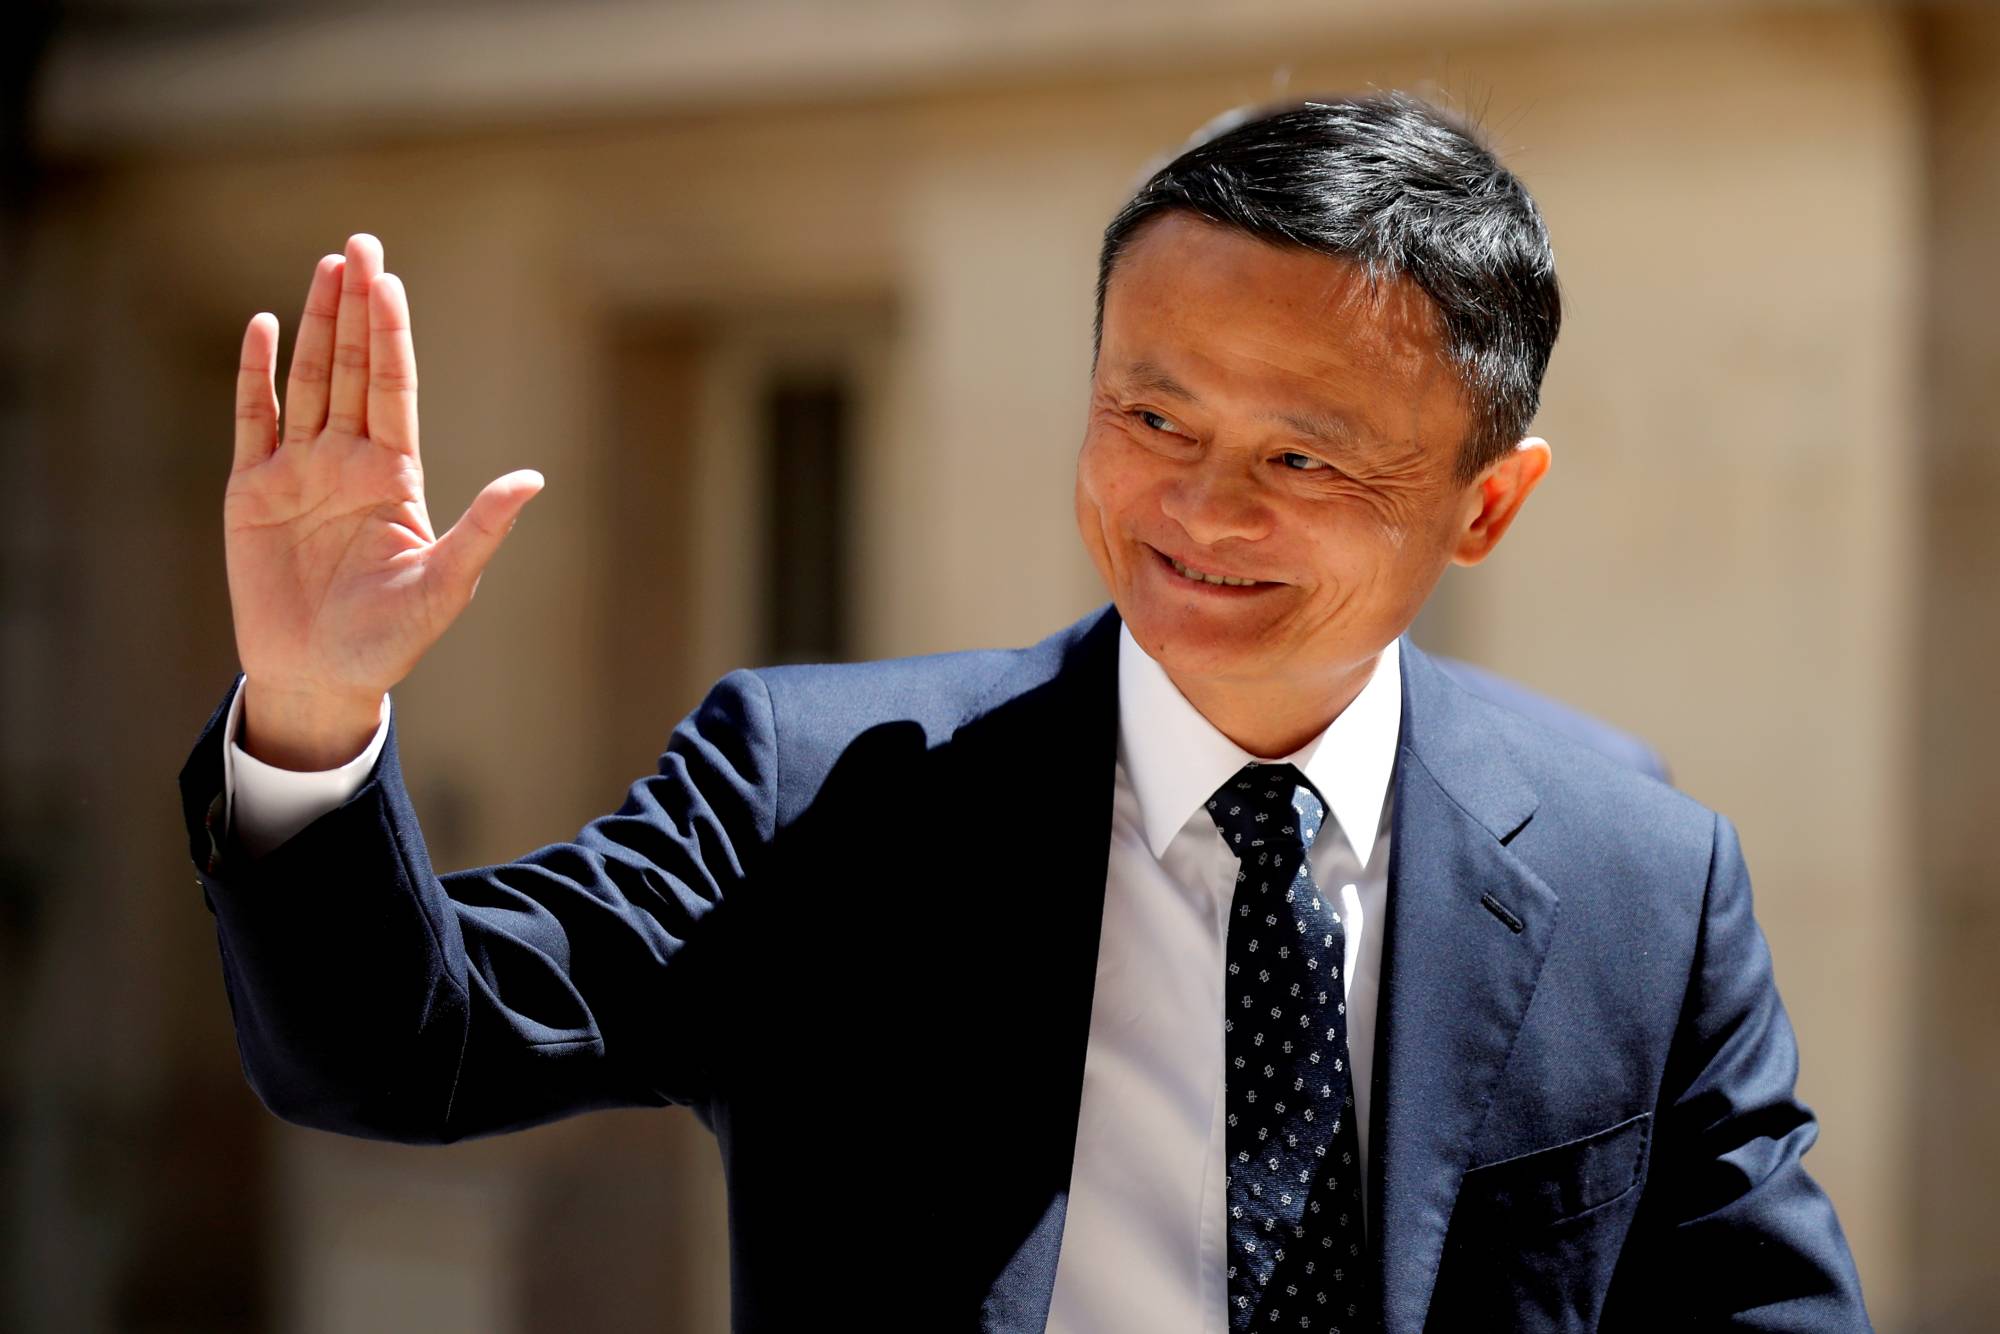 FILE PHOTO: Jack Ma, Billionaire Founder Of Alibaba Group, Arrives At The "Tech For Good" Summit In Paris, France